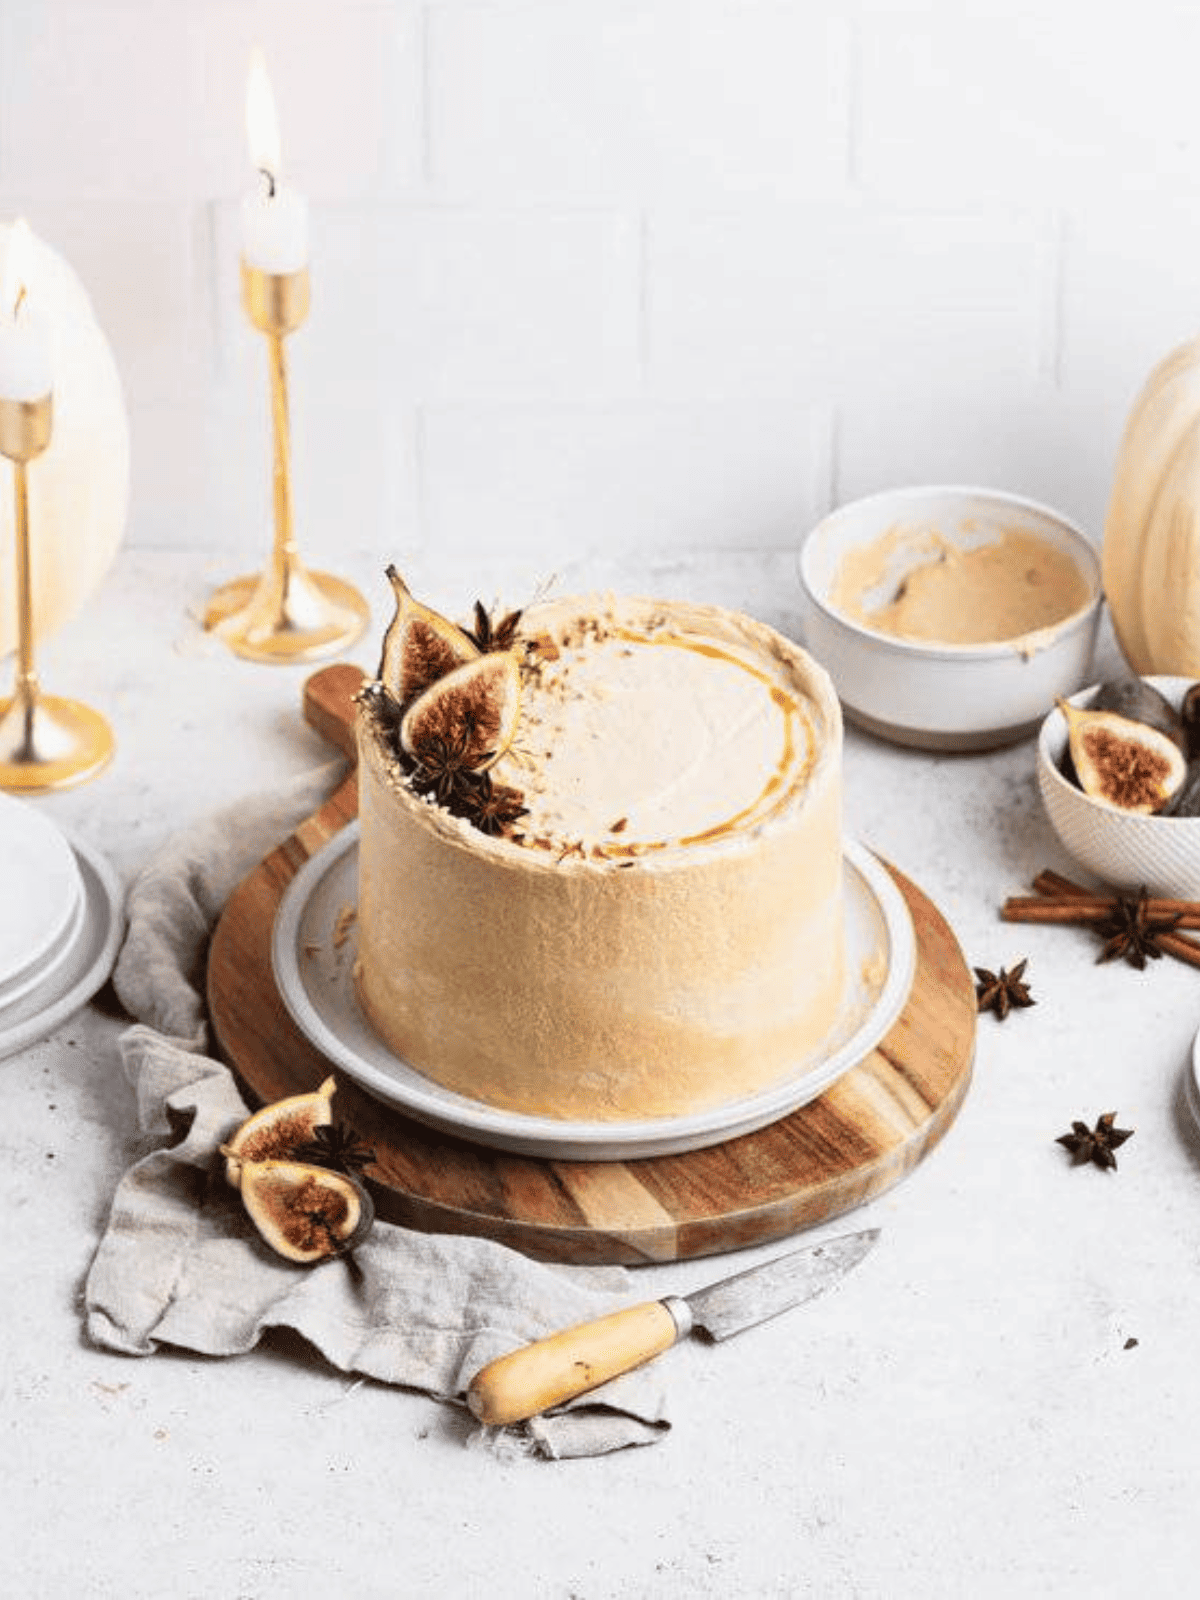 Fancy Dessert Chai Cake with Boiled Milk Frosting